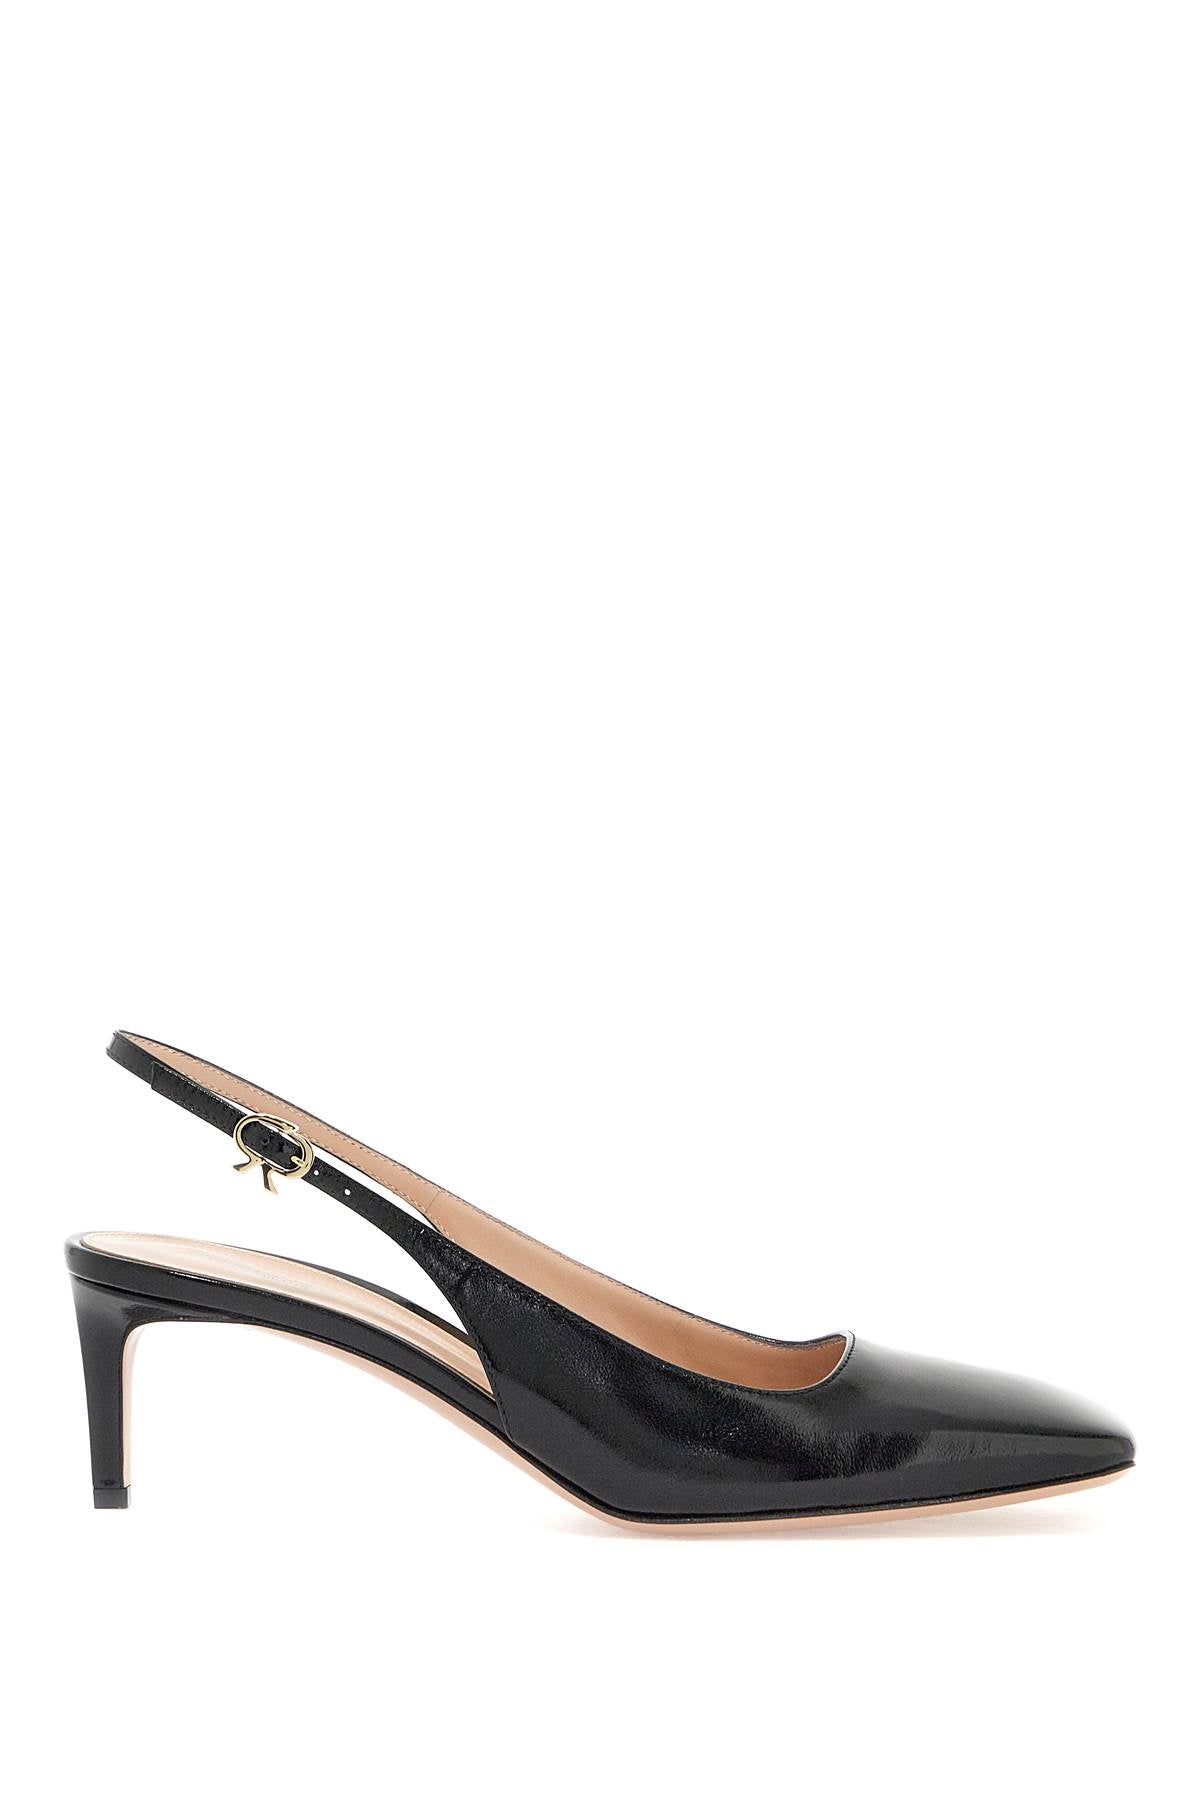 GIANVITO ROSSI Sophisticated Black Leather Slingback Pumps